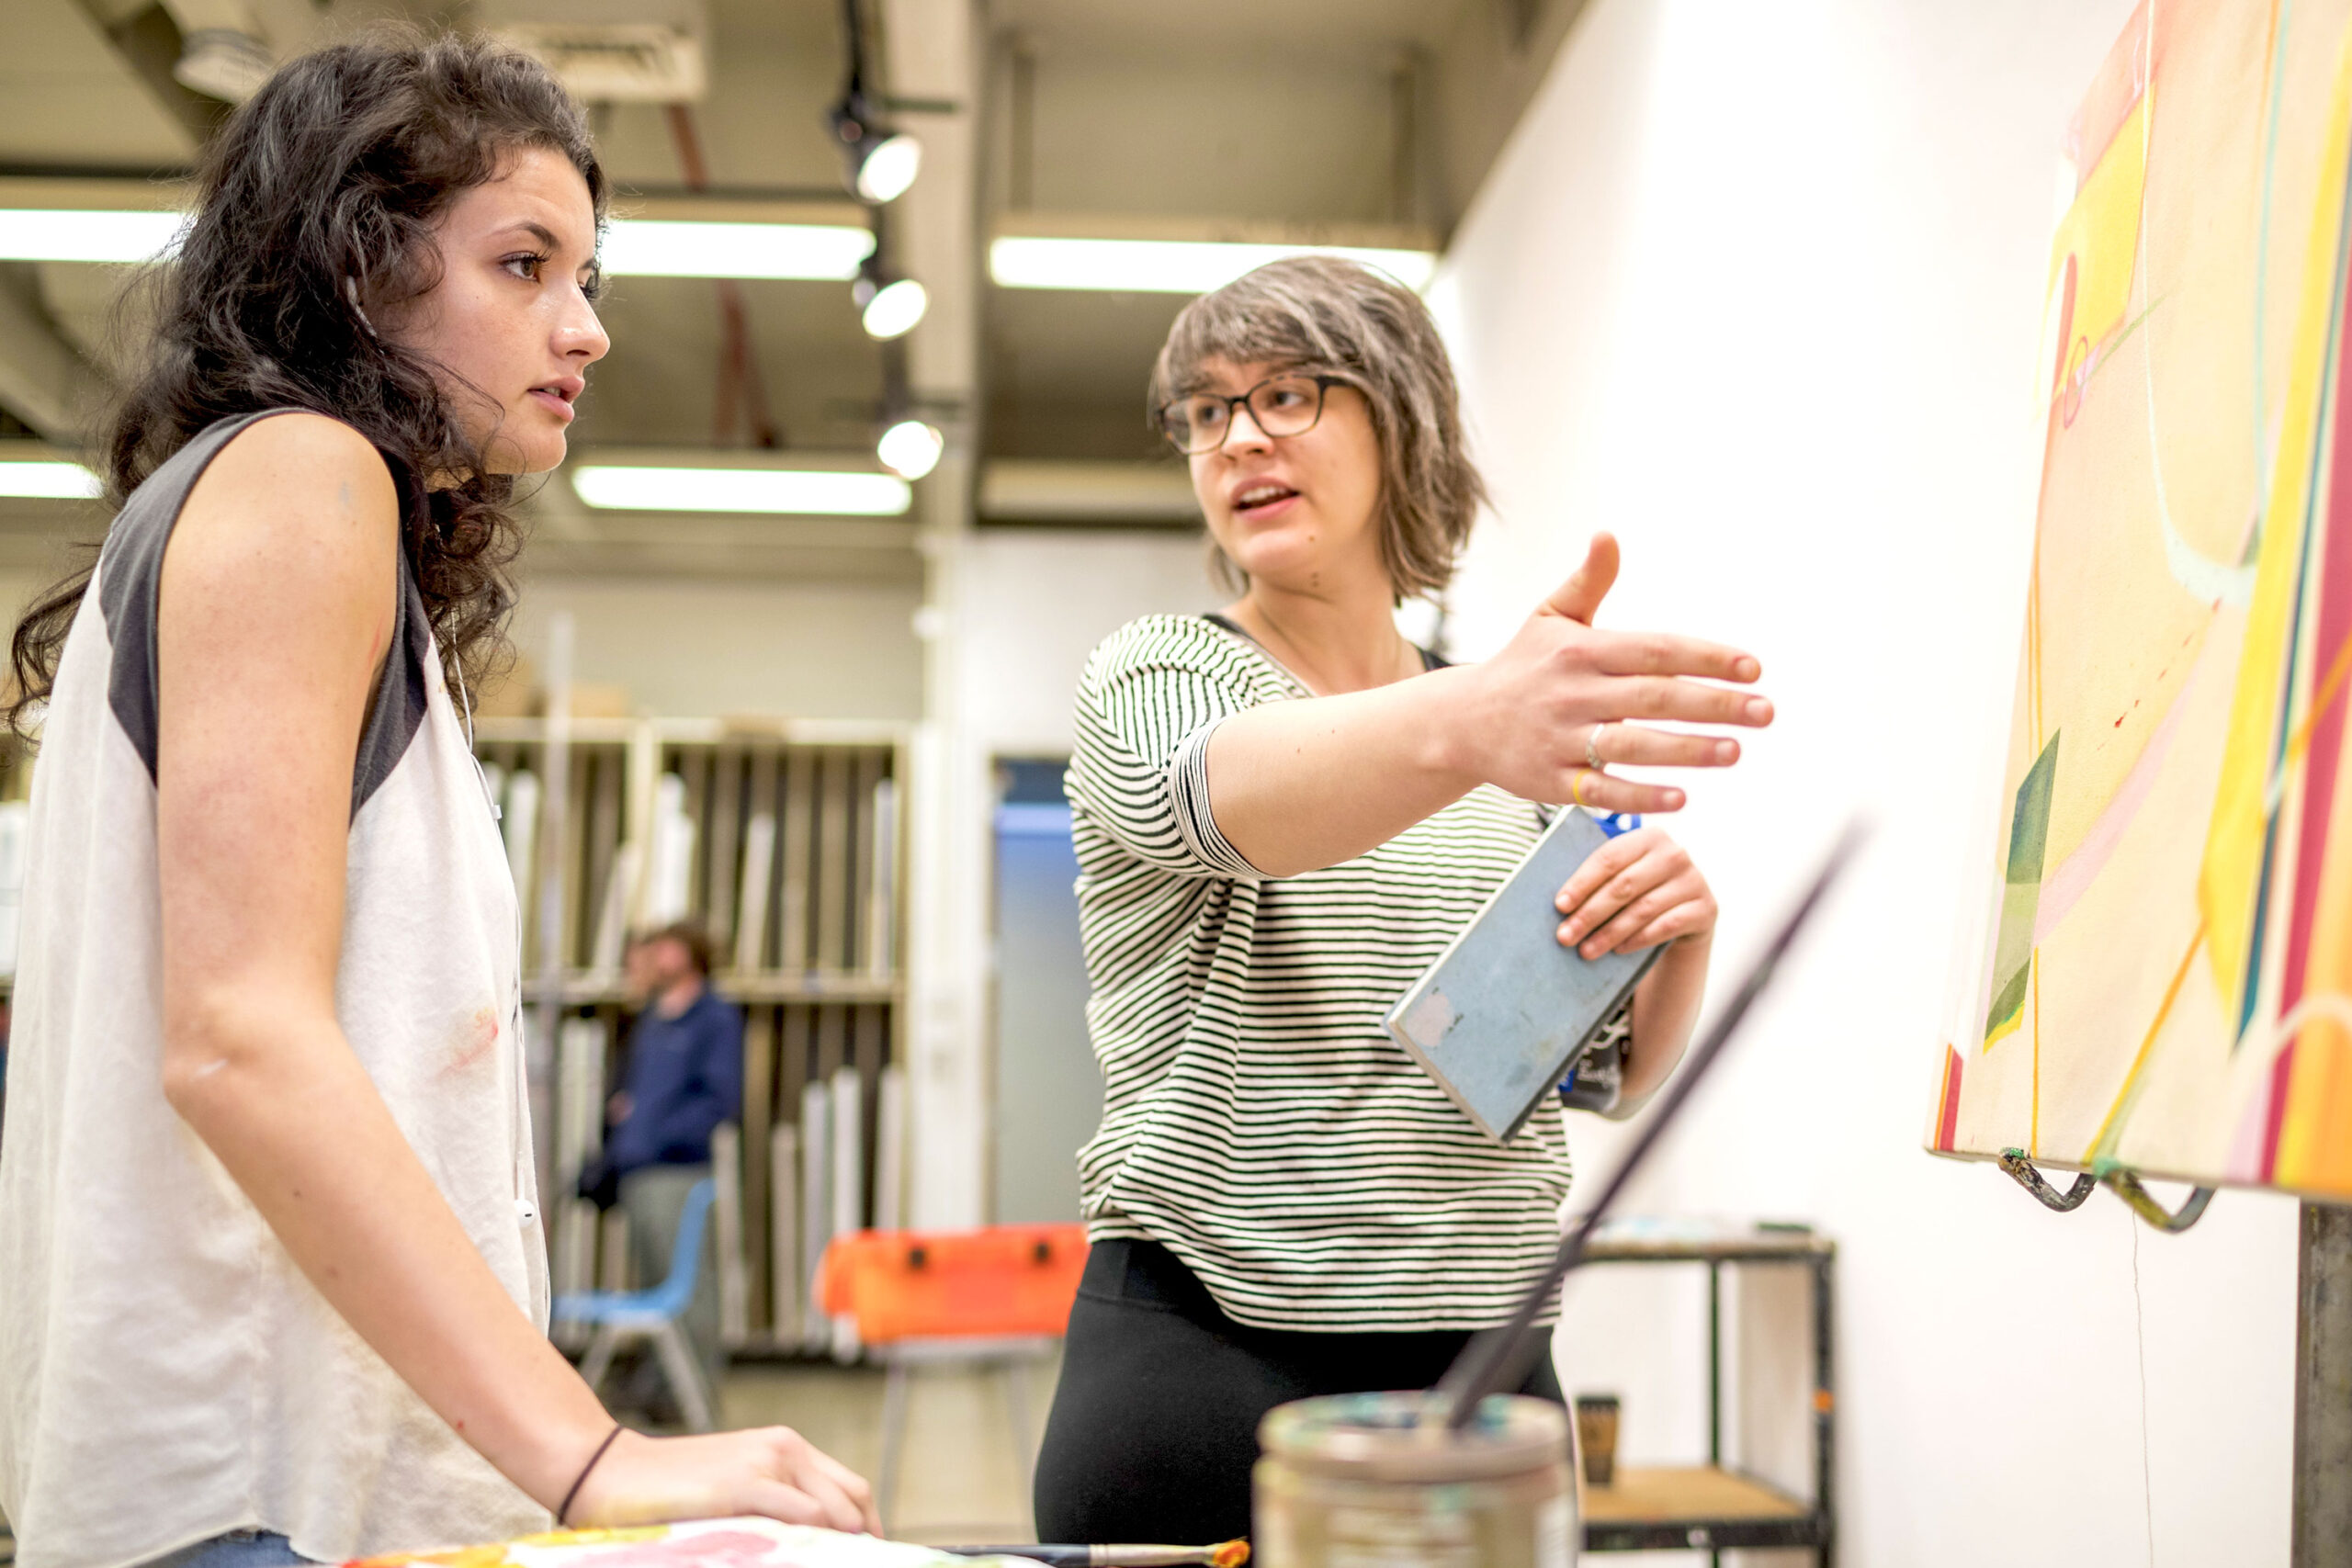 A student receives helpful instruction from supporting faculty in the painting studio during an art class